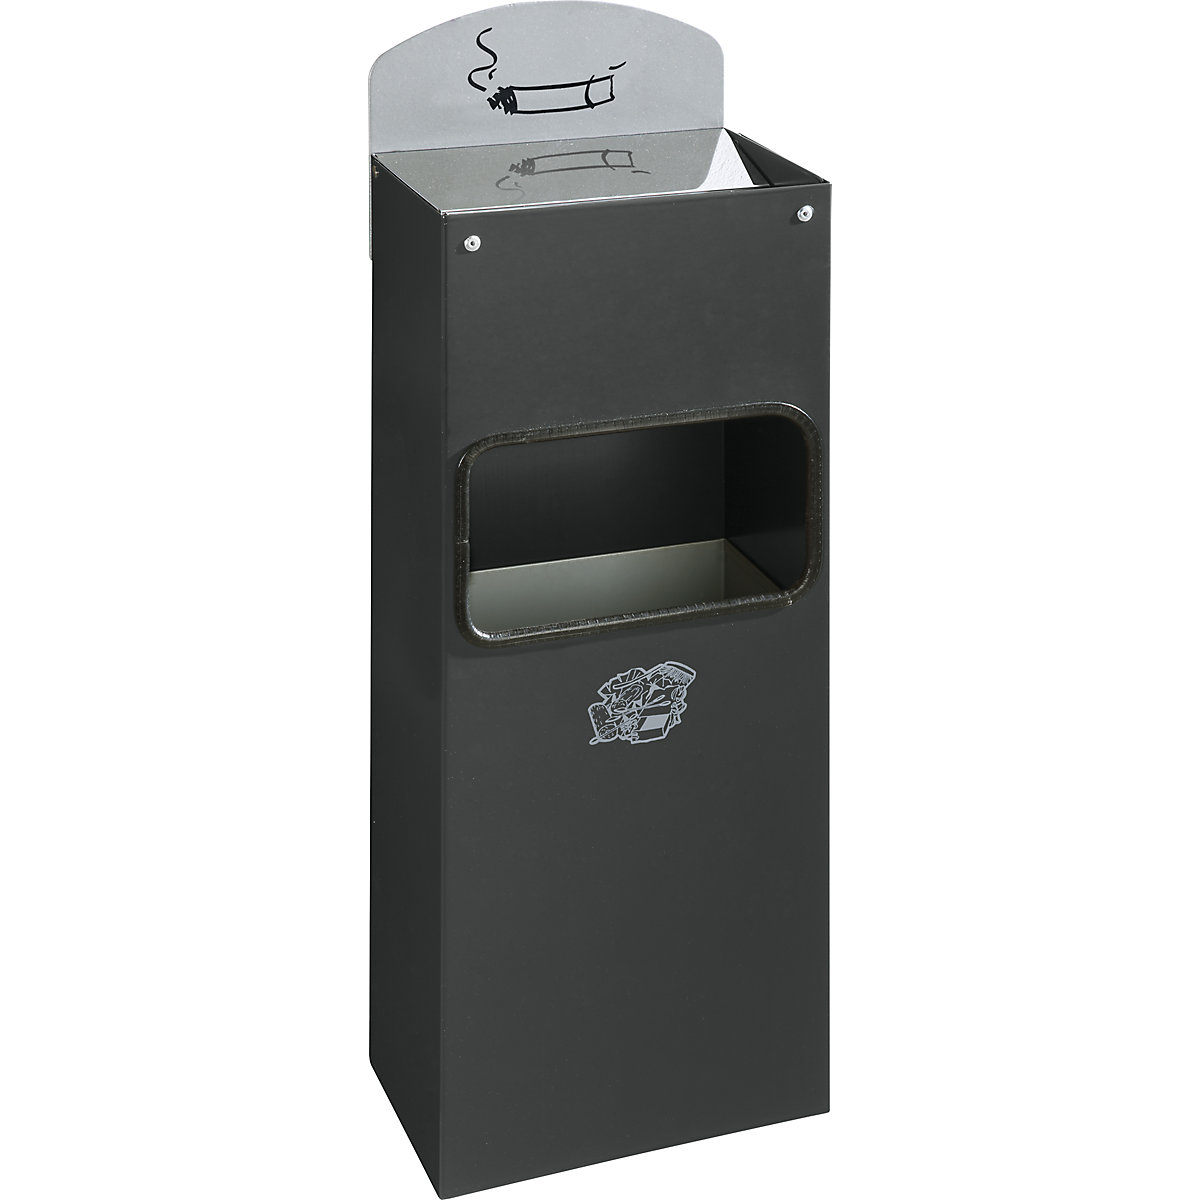 VAR – Combination wall ashtray with waste disposal, HxWxD 505 x 200 x 125 mm, sheet steel, charcoal